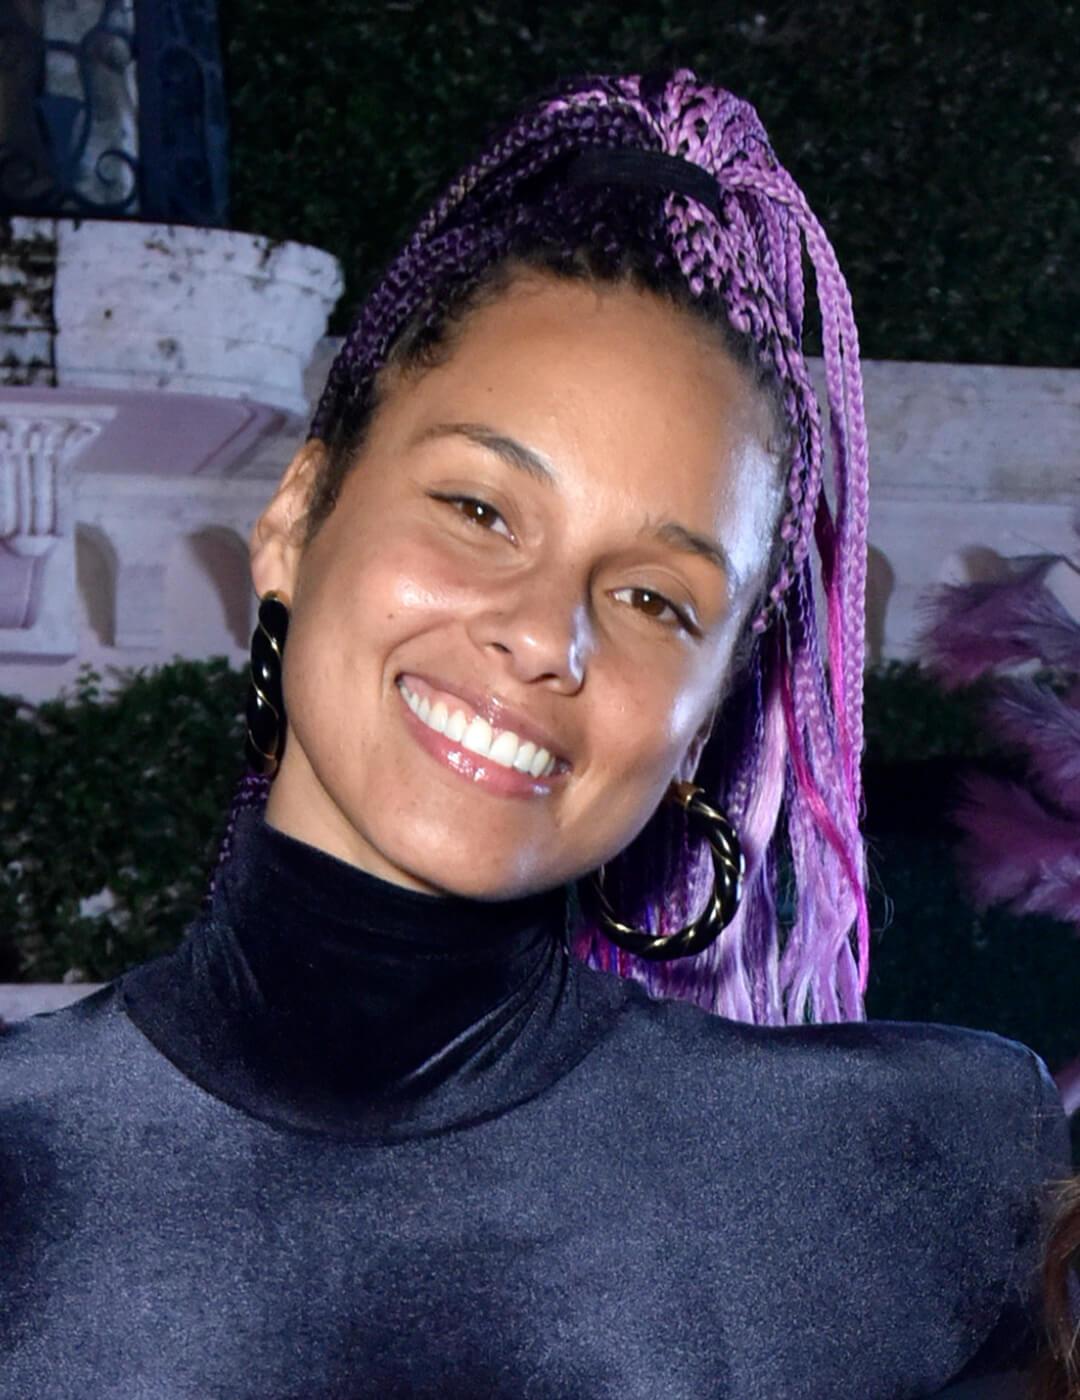 Smiling Alicia Keys rocking a purple braided high ponytail hairstyle